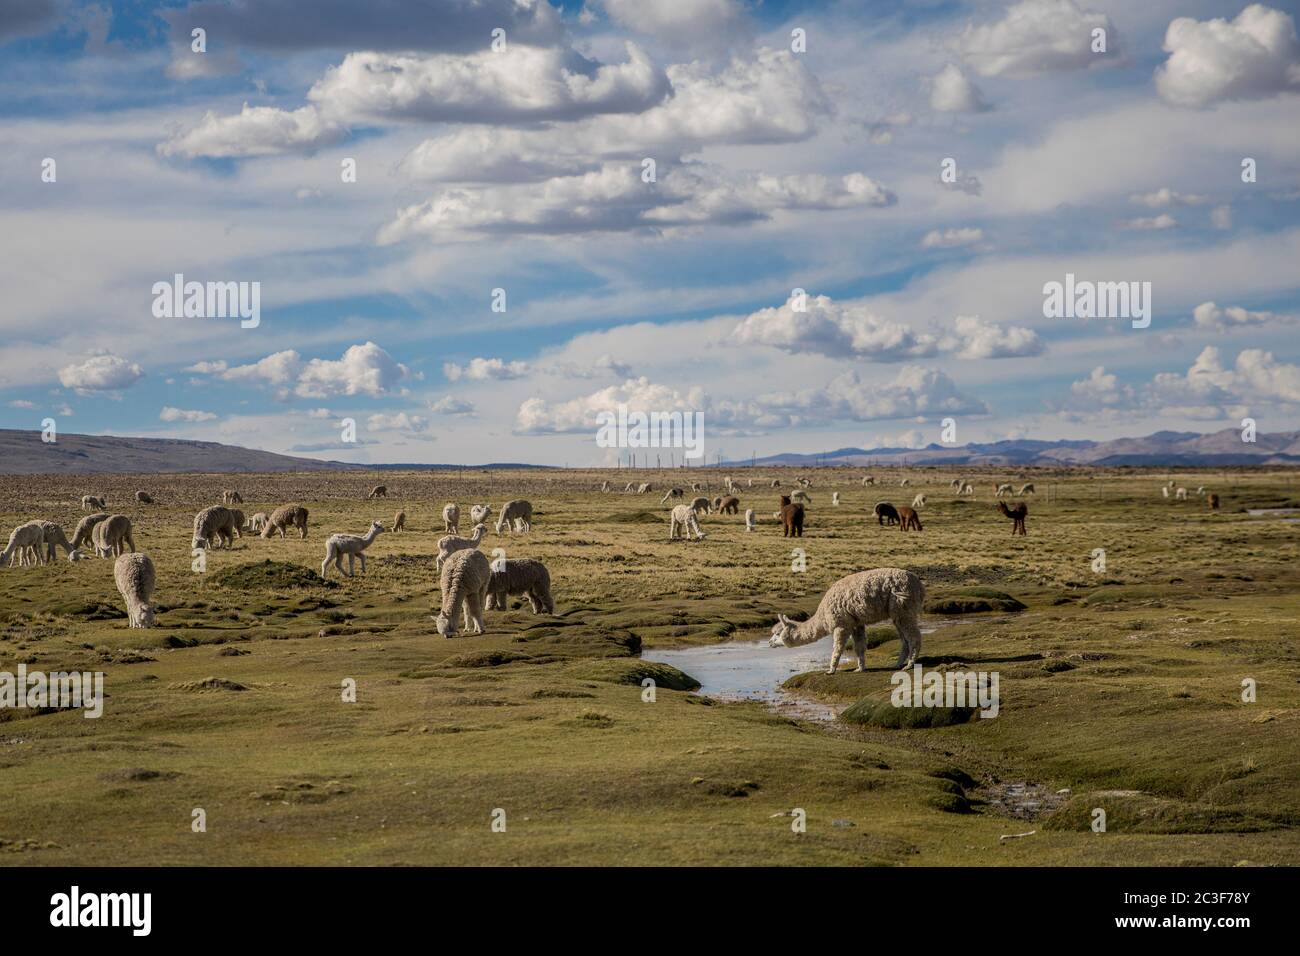 folk in field, lamas and vicunas, river and clouds Stock Photo